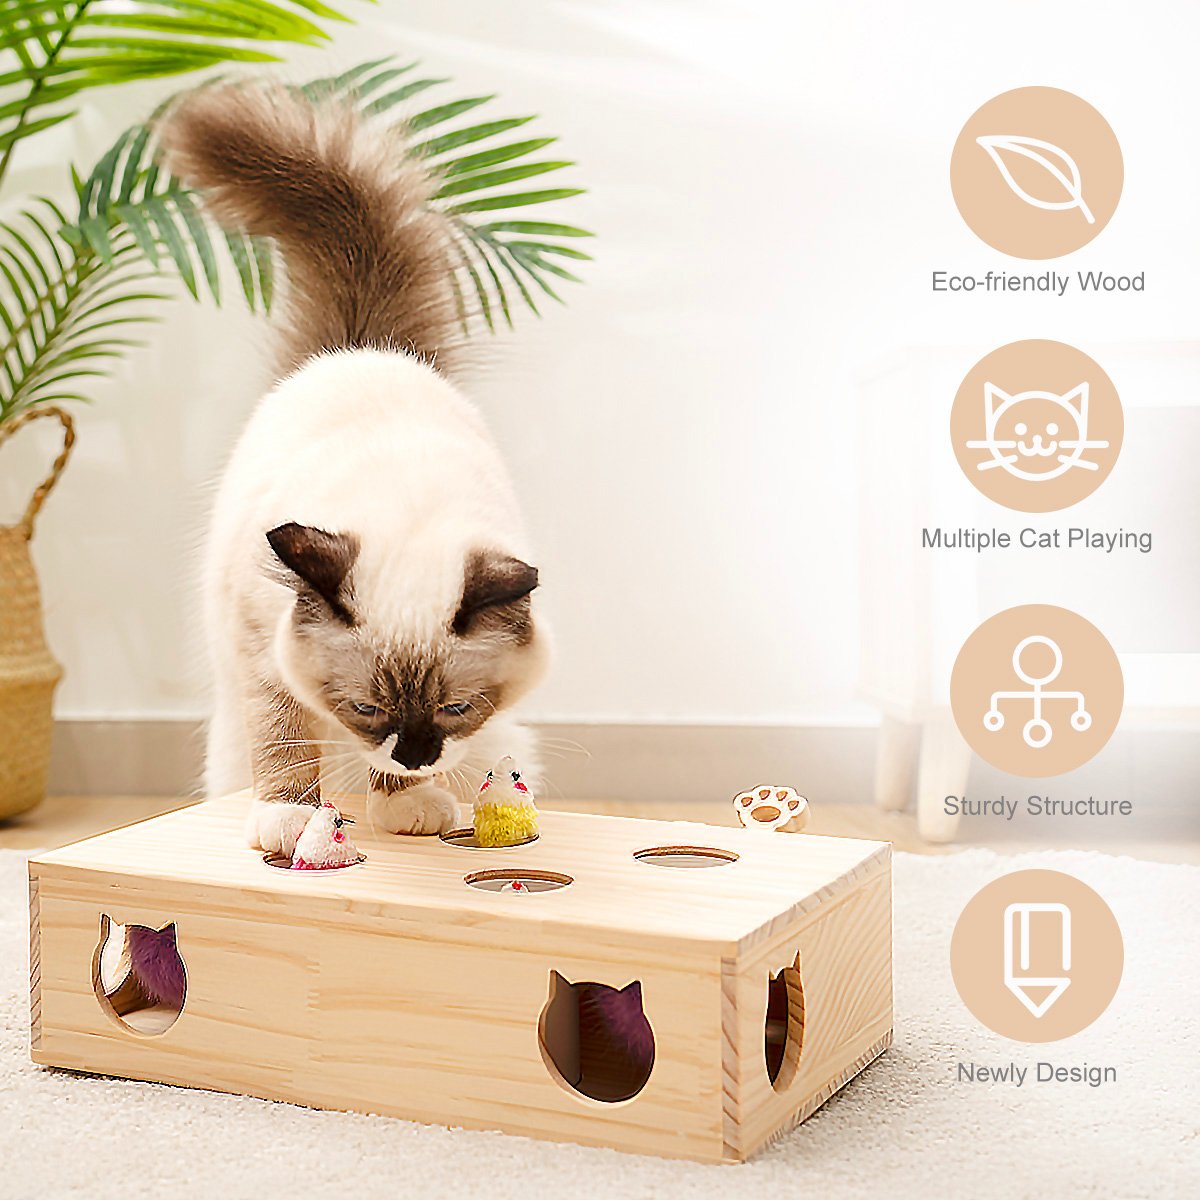 New MewooFun Cat Toys Interactive Whack-a-mole Solid Wood Toys for - Taplike